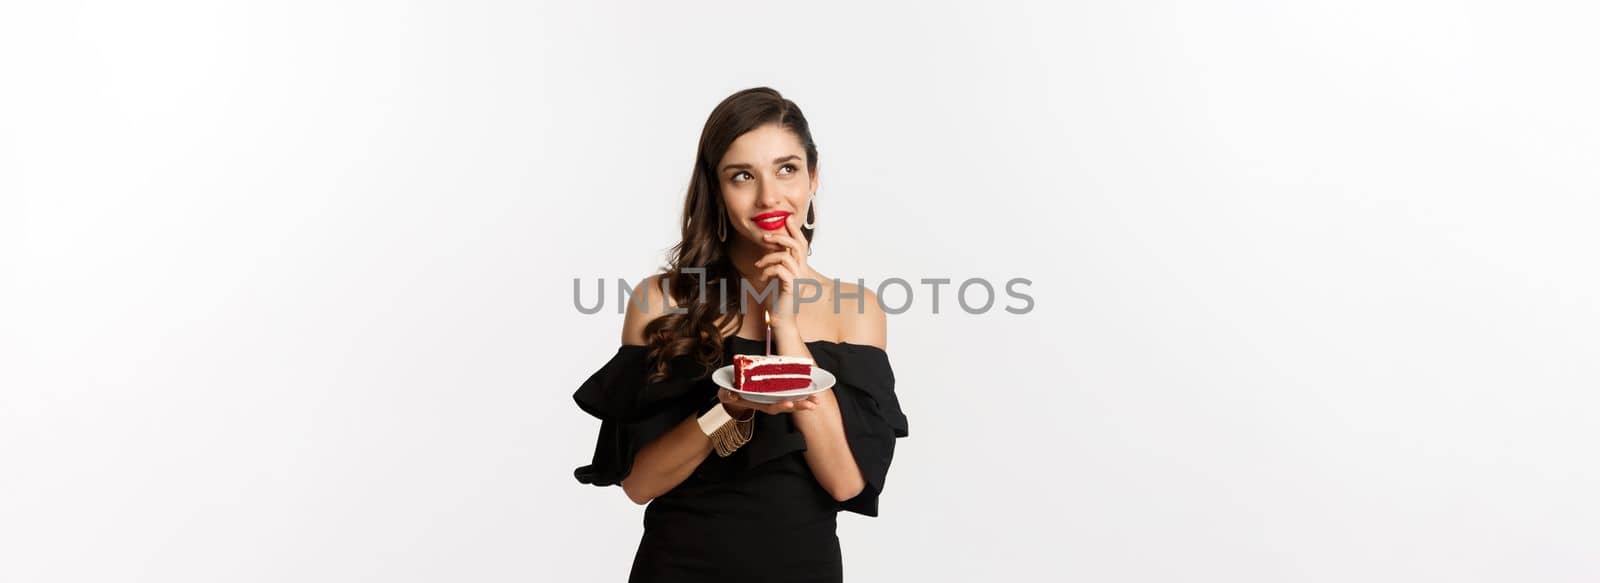 Celebration and party concept. Dreamy woman in black dress making wish, thinking and holding birthday cake with candle, standing over white background.